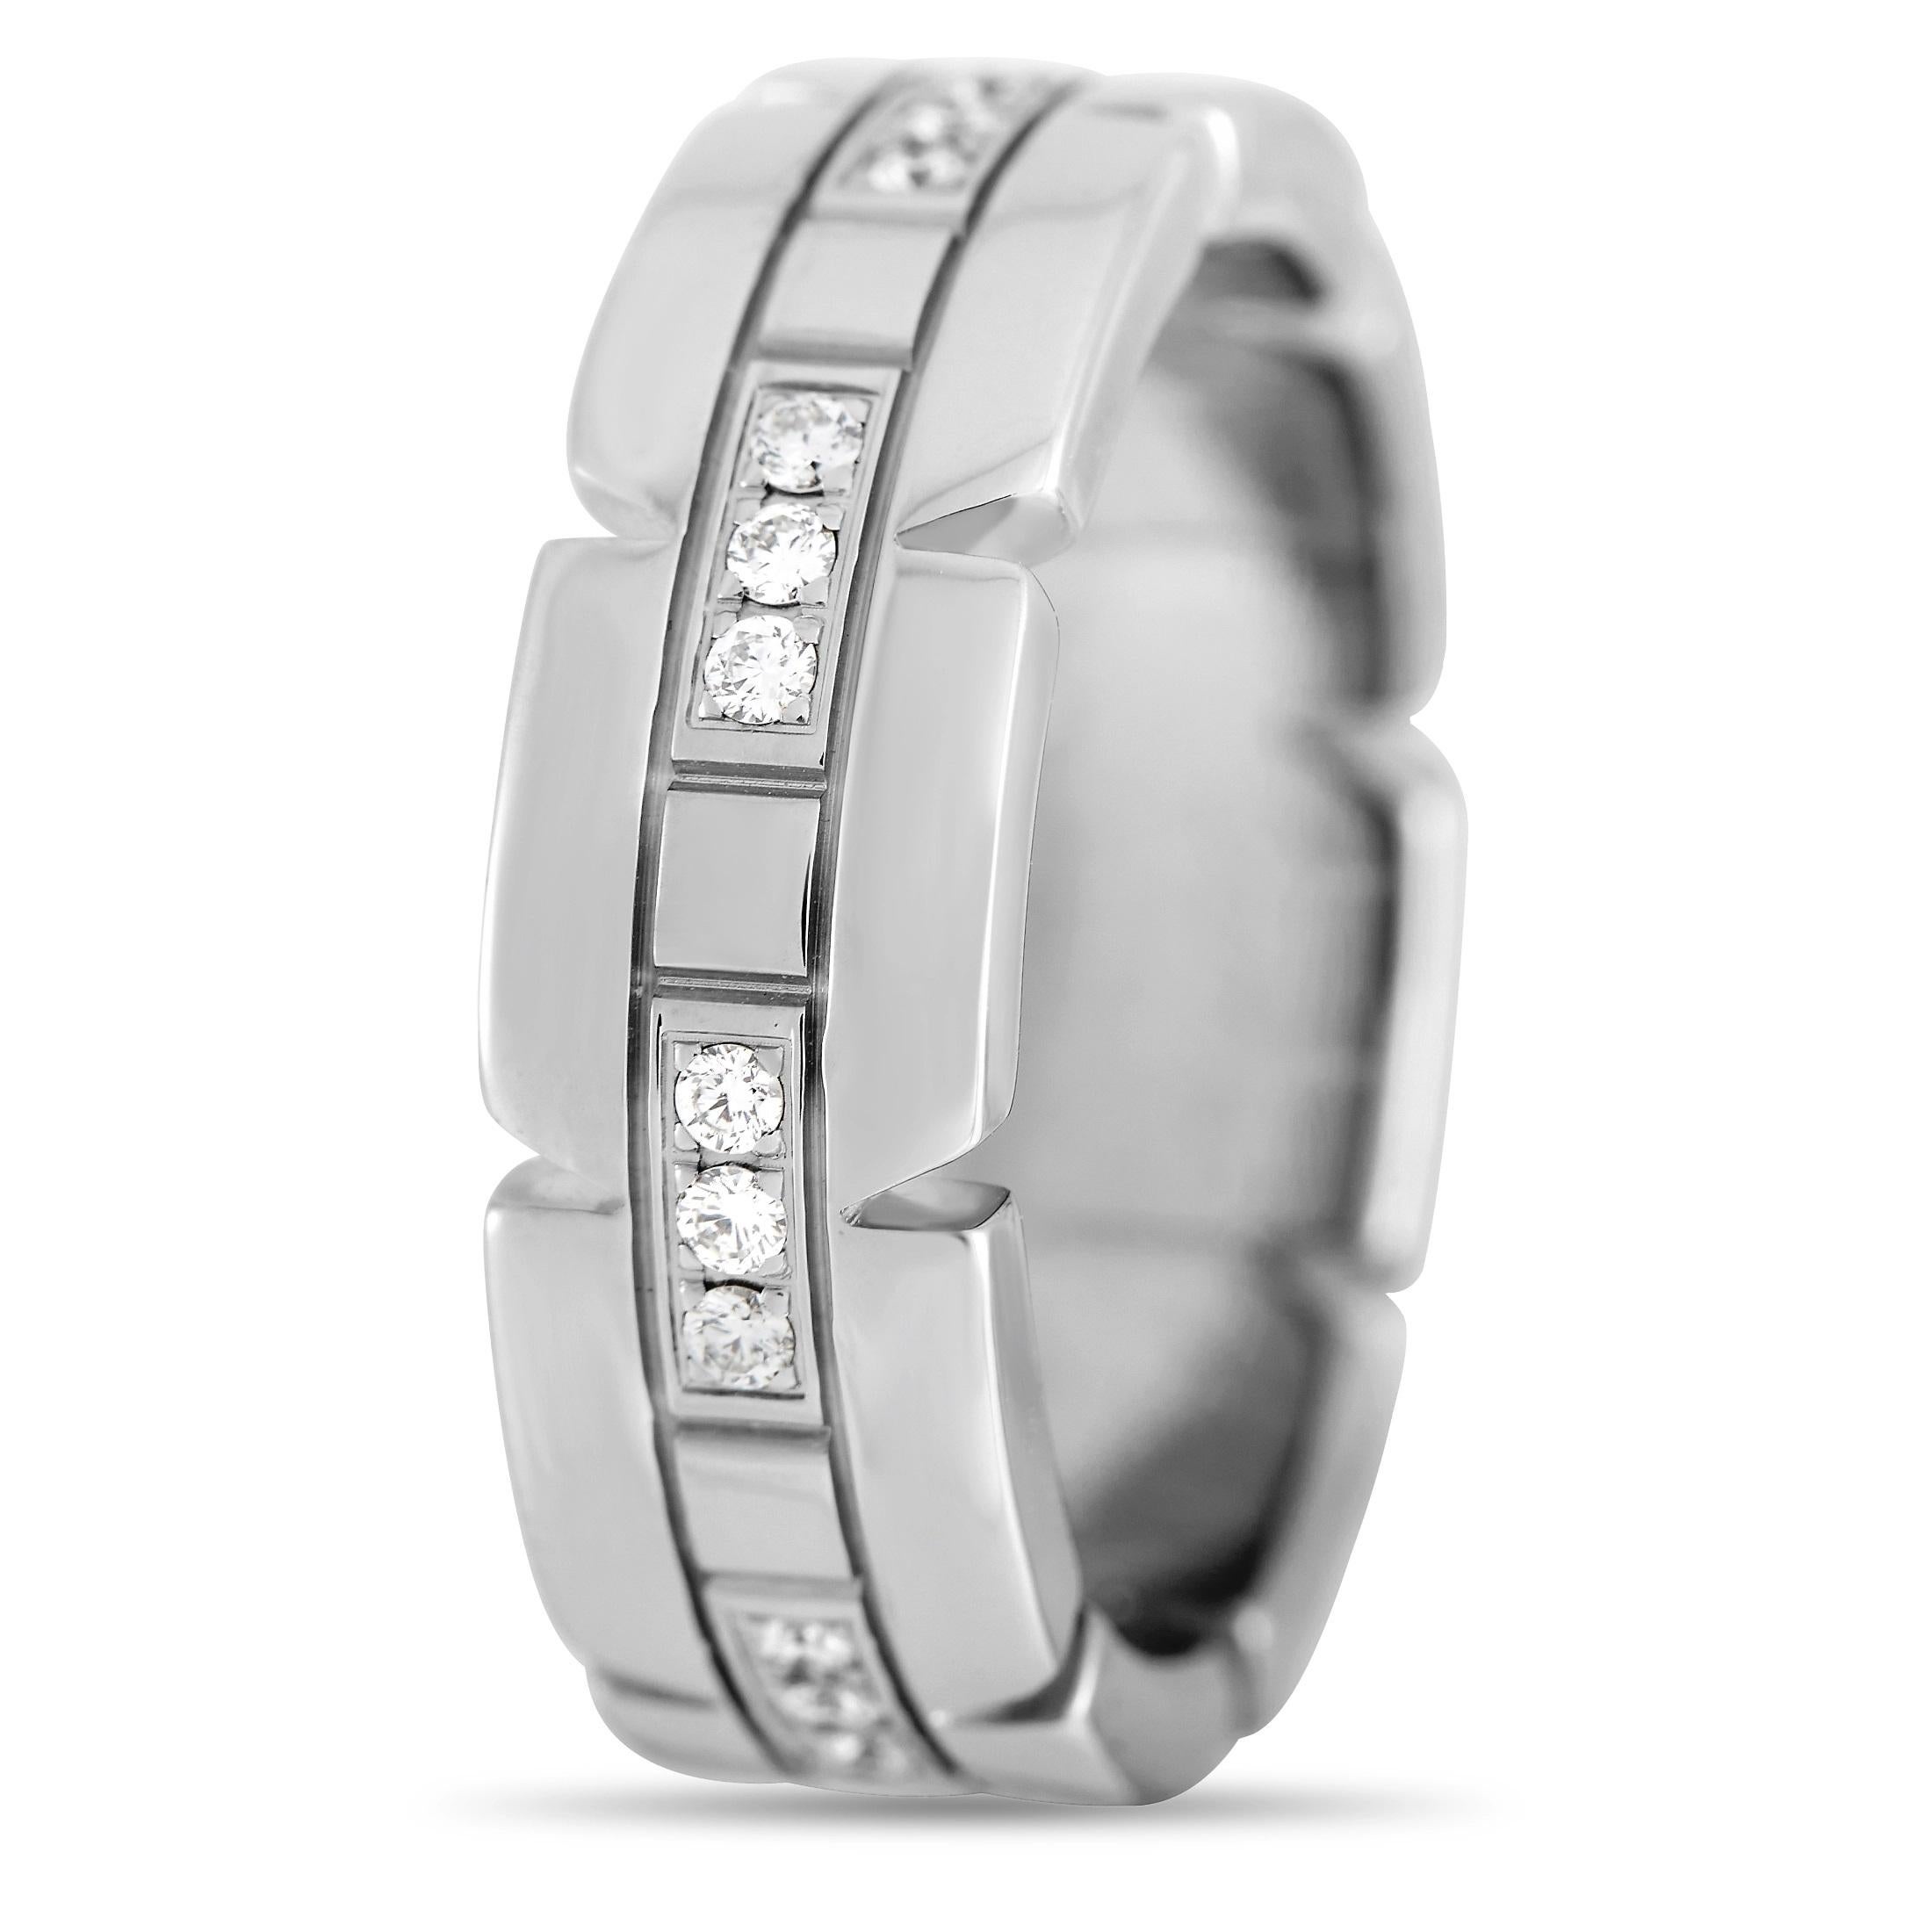 There’s something timeless about this elegant Cartier Tank Francaise ring. This sleek, sophisticated band ring measures 6mm wide and is elevated by the presence of sparkling inset diamonds. Notched edges around the perimeter of the band make it even